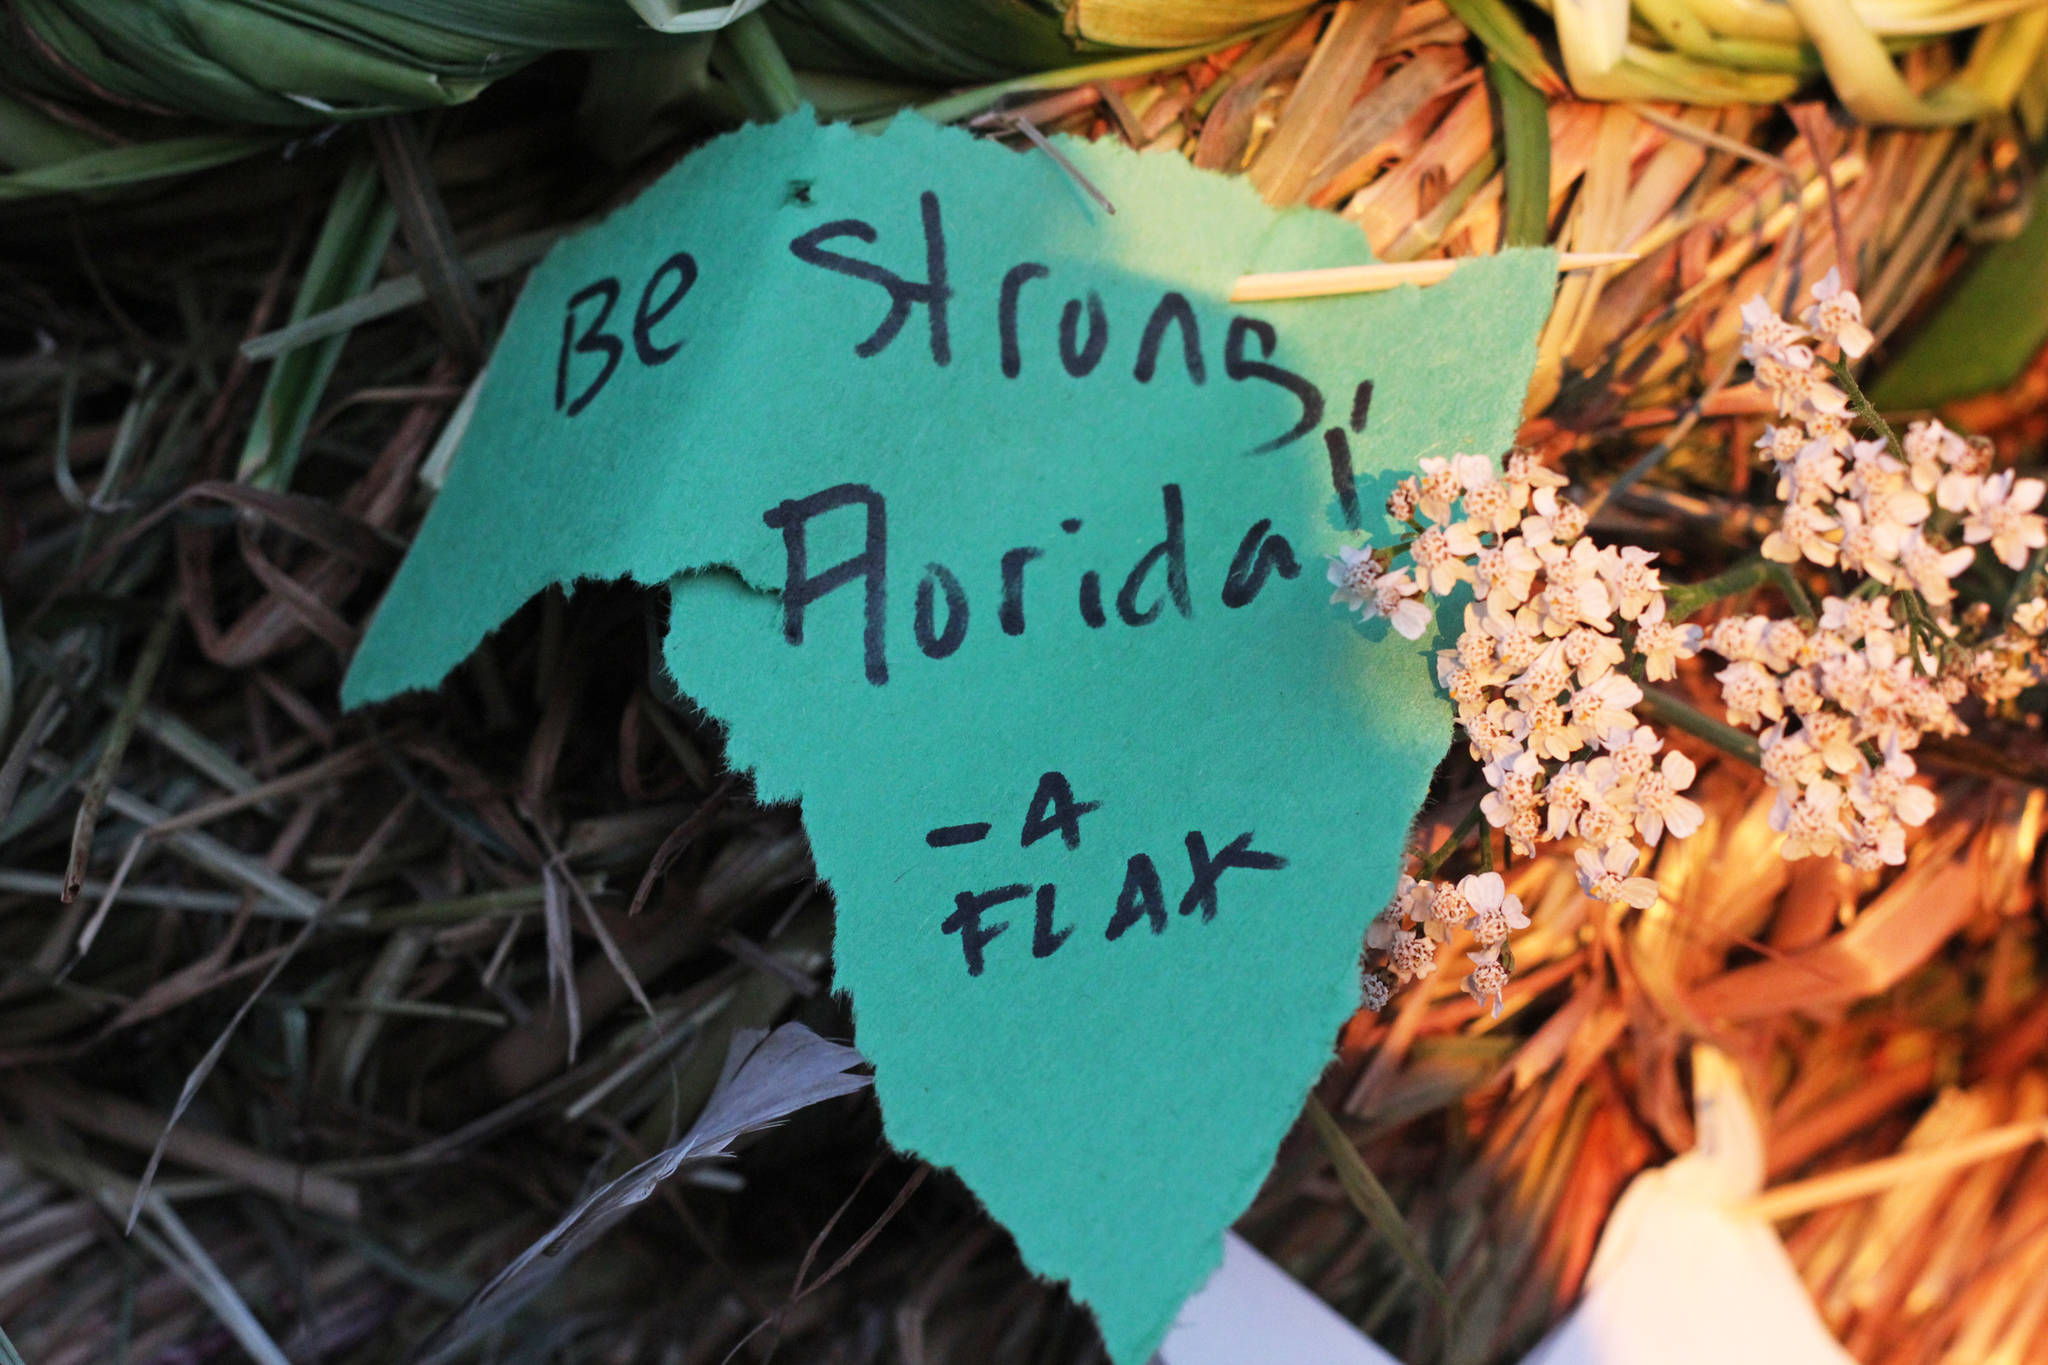 A note reading “Be strong, Florida” sits affixed to the side of this year’s Burning Basket Project on Sunday, Sept. 10, 2017 at Mariner Park in Homer, Alaska. The 14th annual Burning Project invited the public to help build the basket and place notes and trinkets inside and on its sides before it was burned. (Photo by Megan Pacer/Homer News)